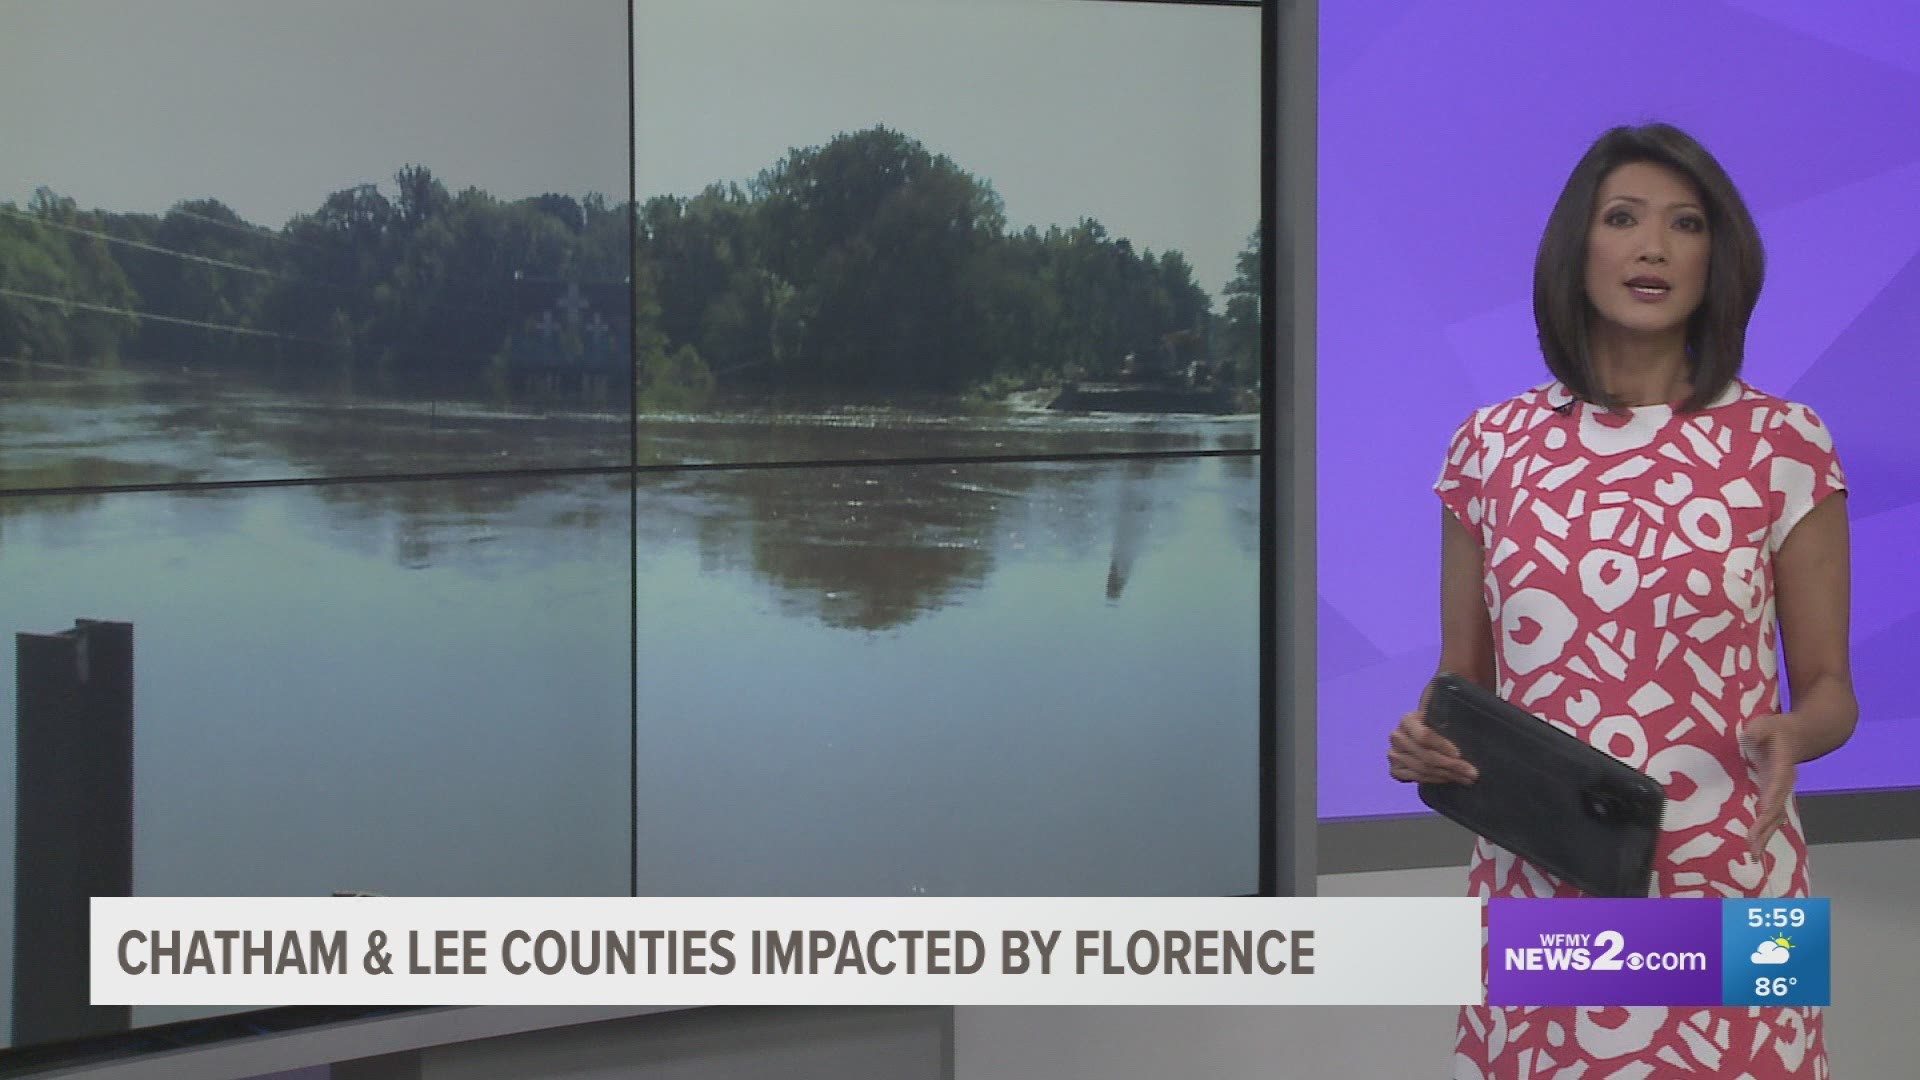 Chatham & Lee Counties Impacted By Florence